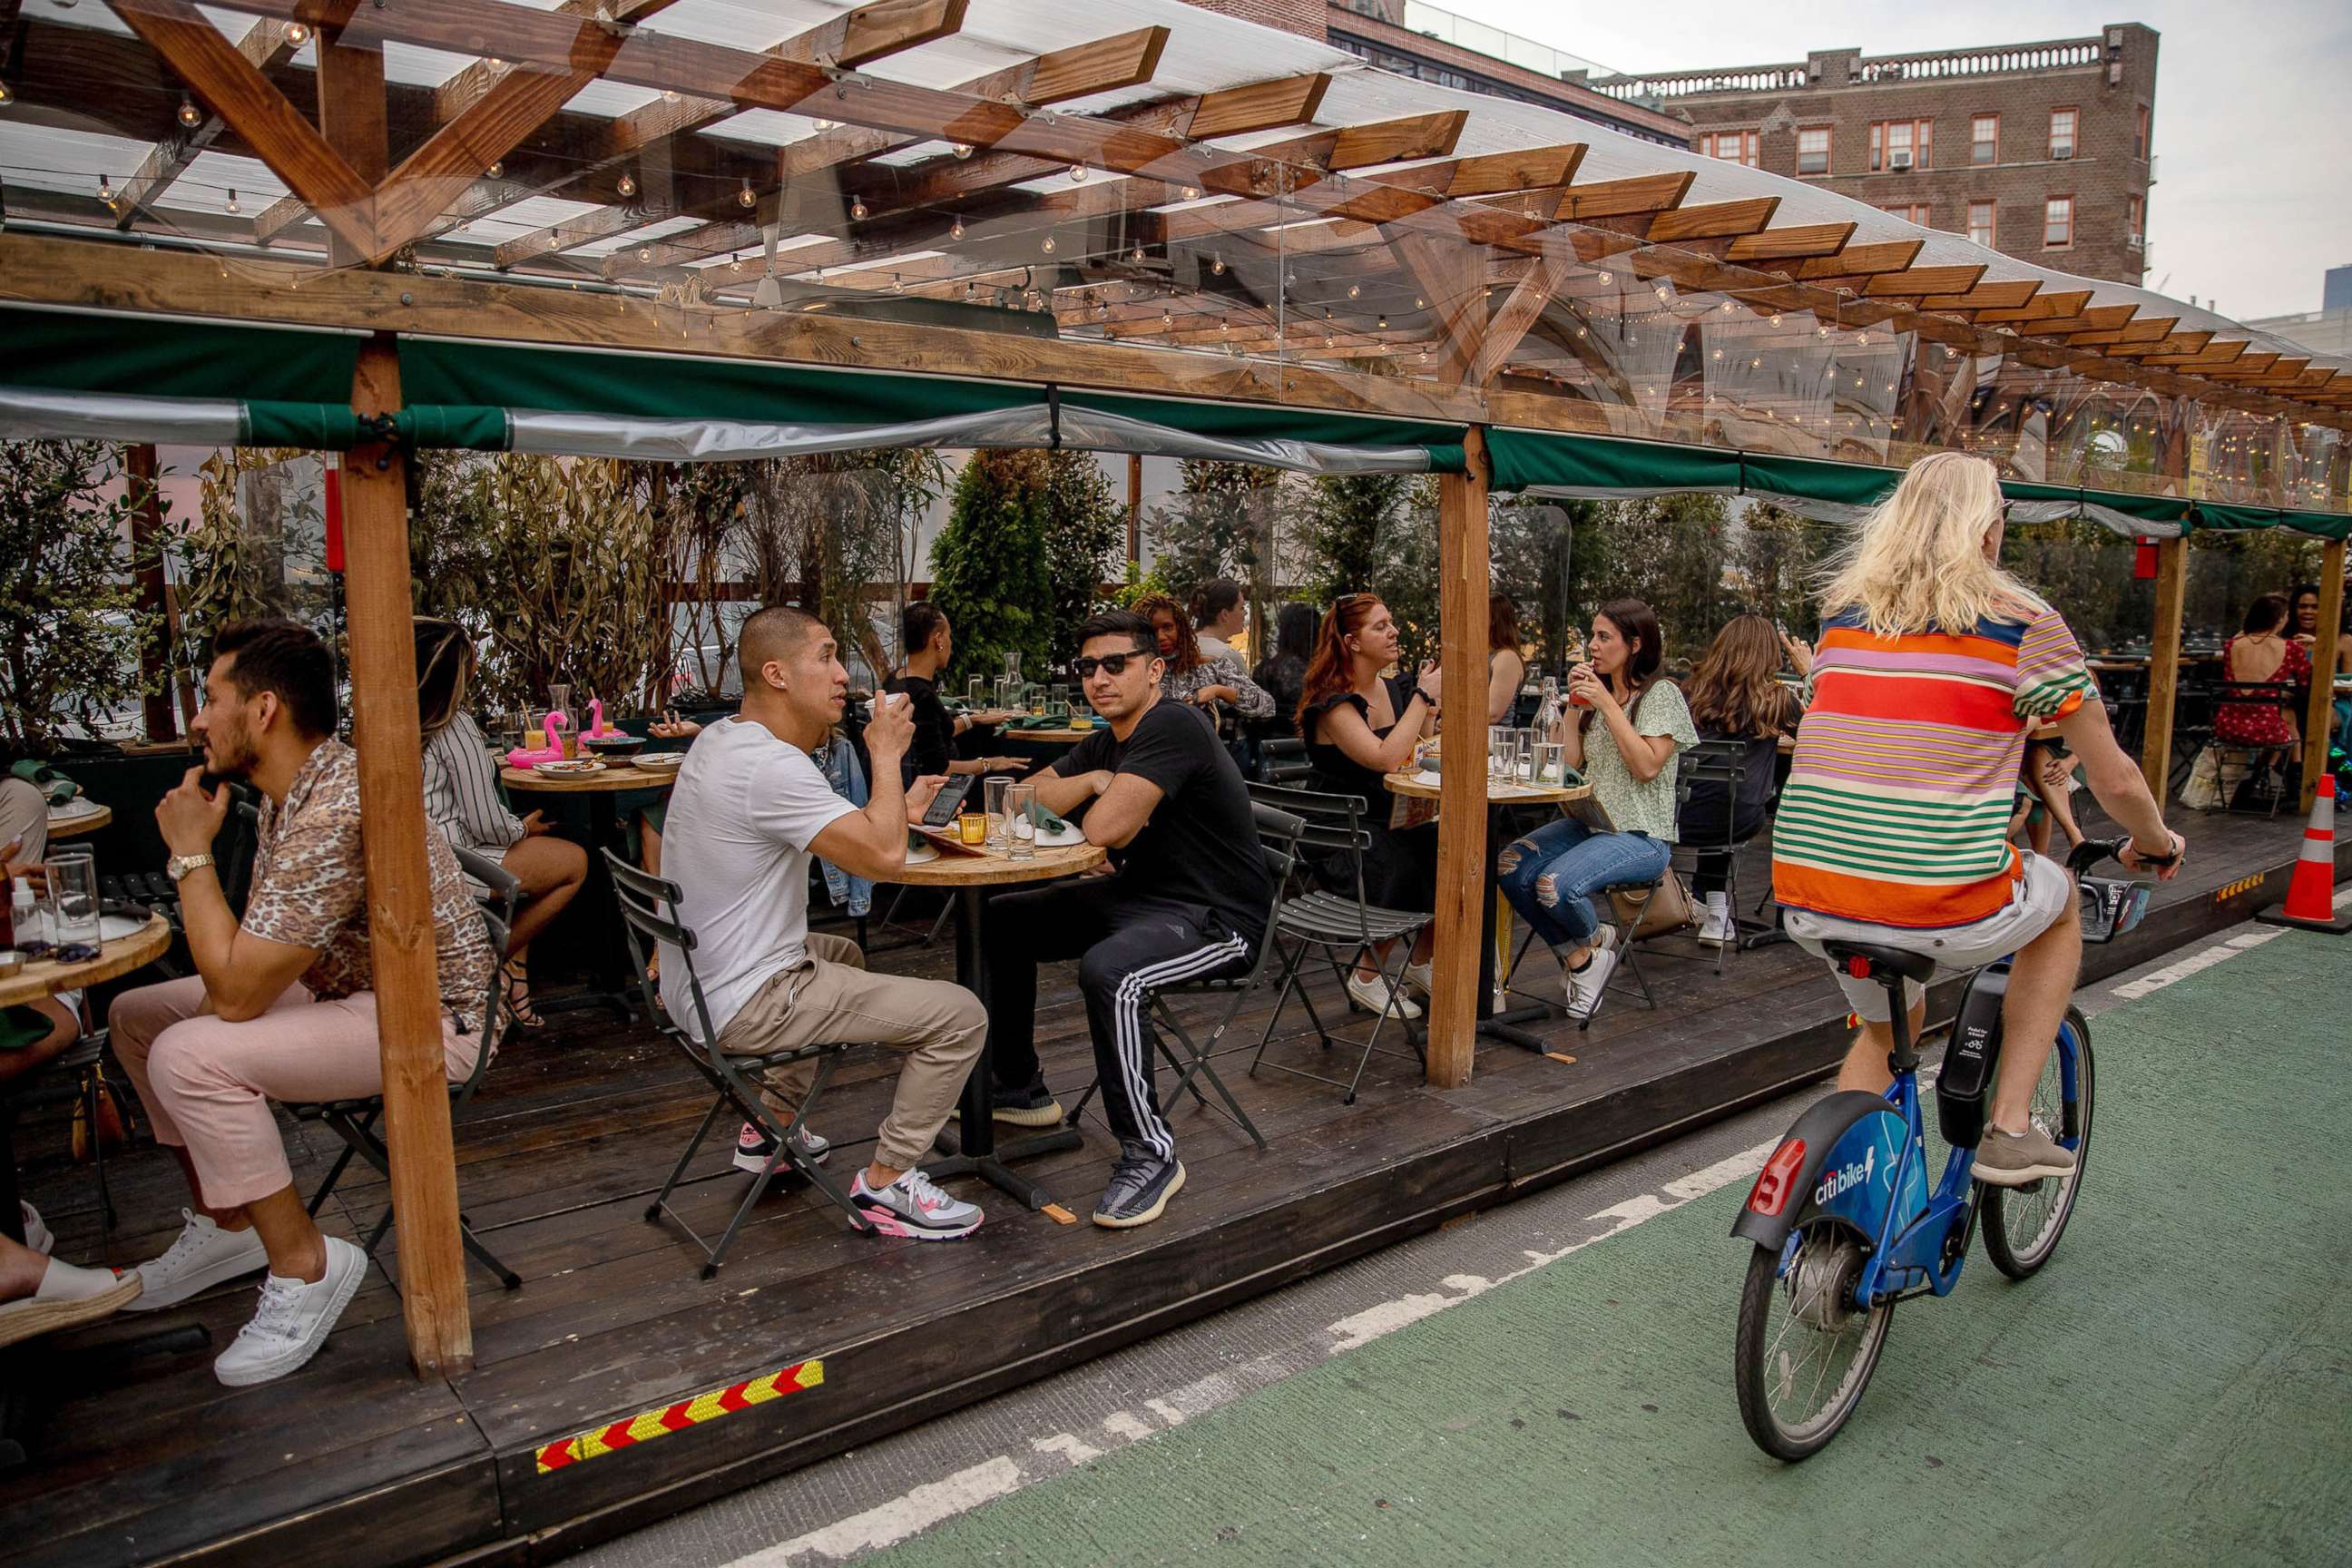 PHOTO: A person rides a bicycle past customers sitting in the outdoor dining area of a restaurant in the West Village neighborhood of New York, April 28, 2021. 